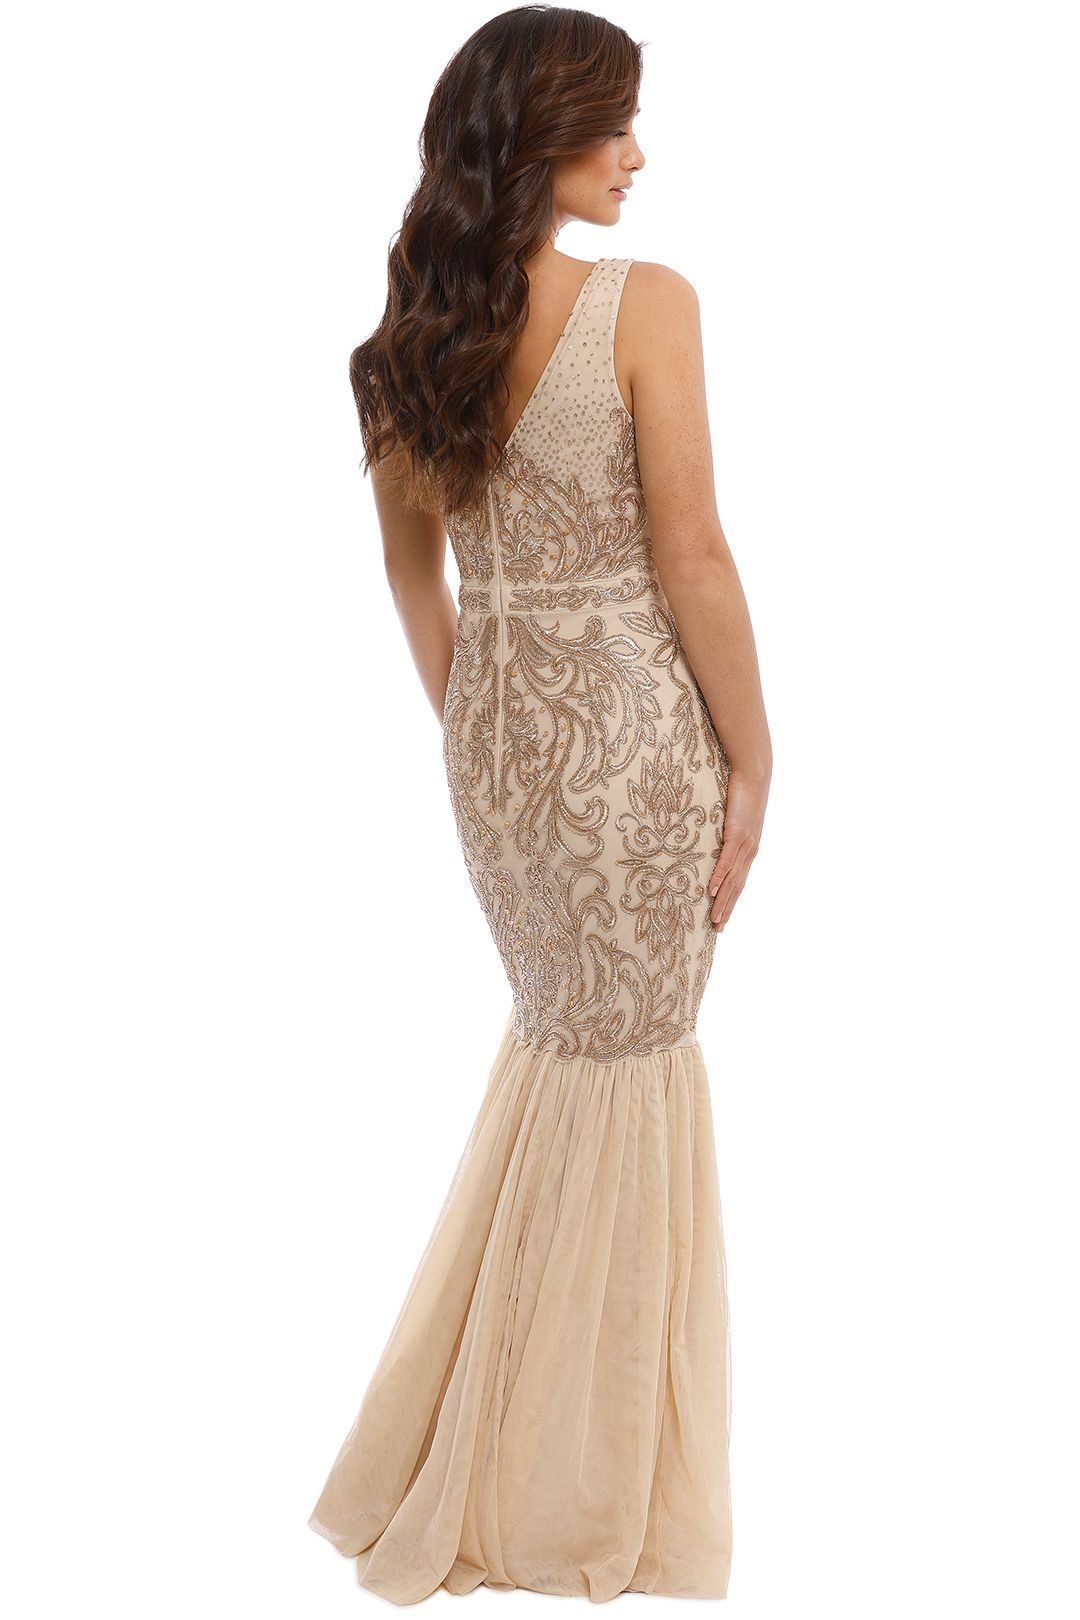 Badgley Mischka - Champagne Beaded Gown - Back